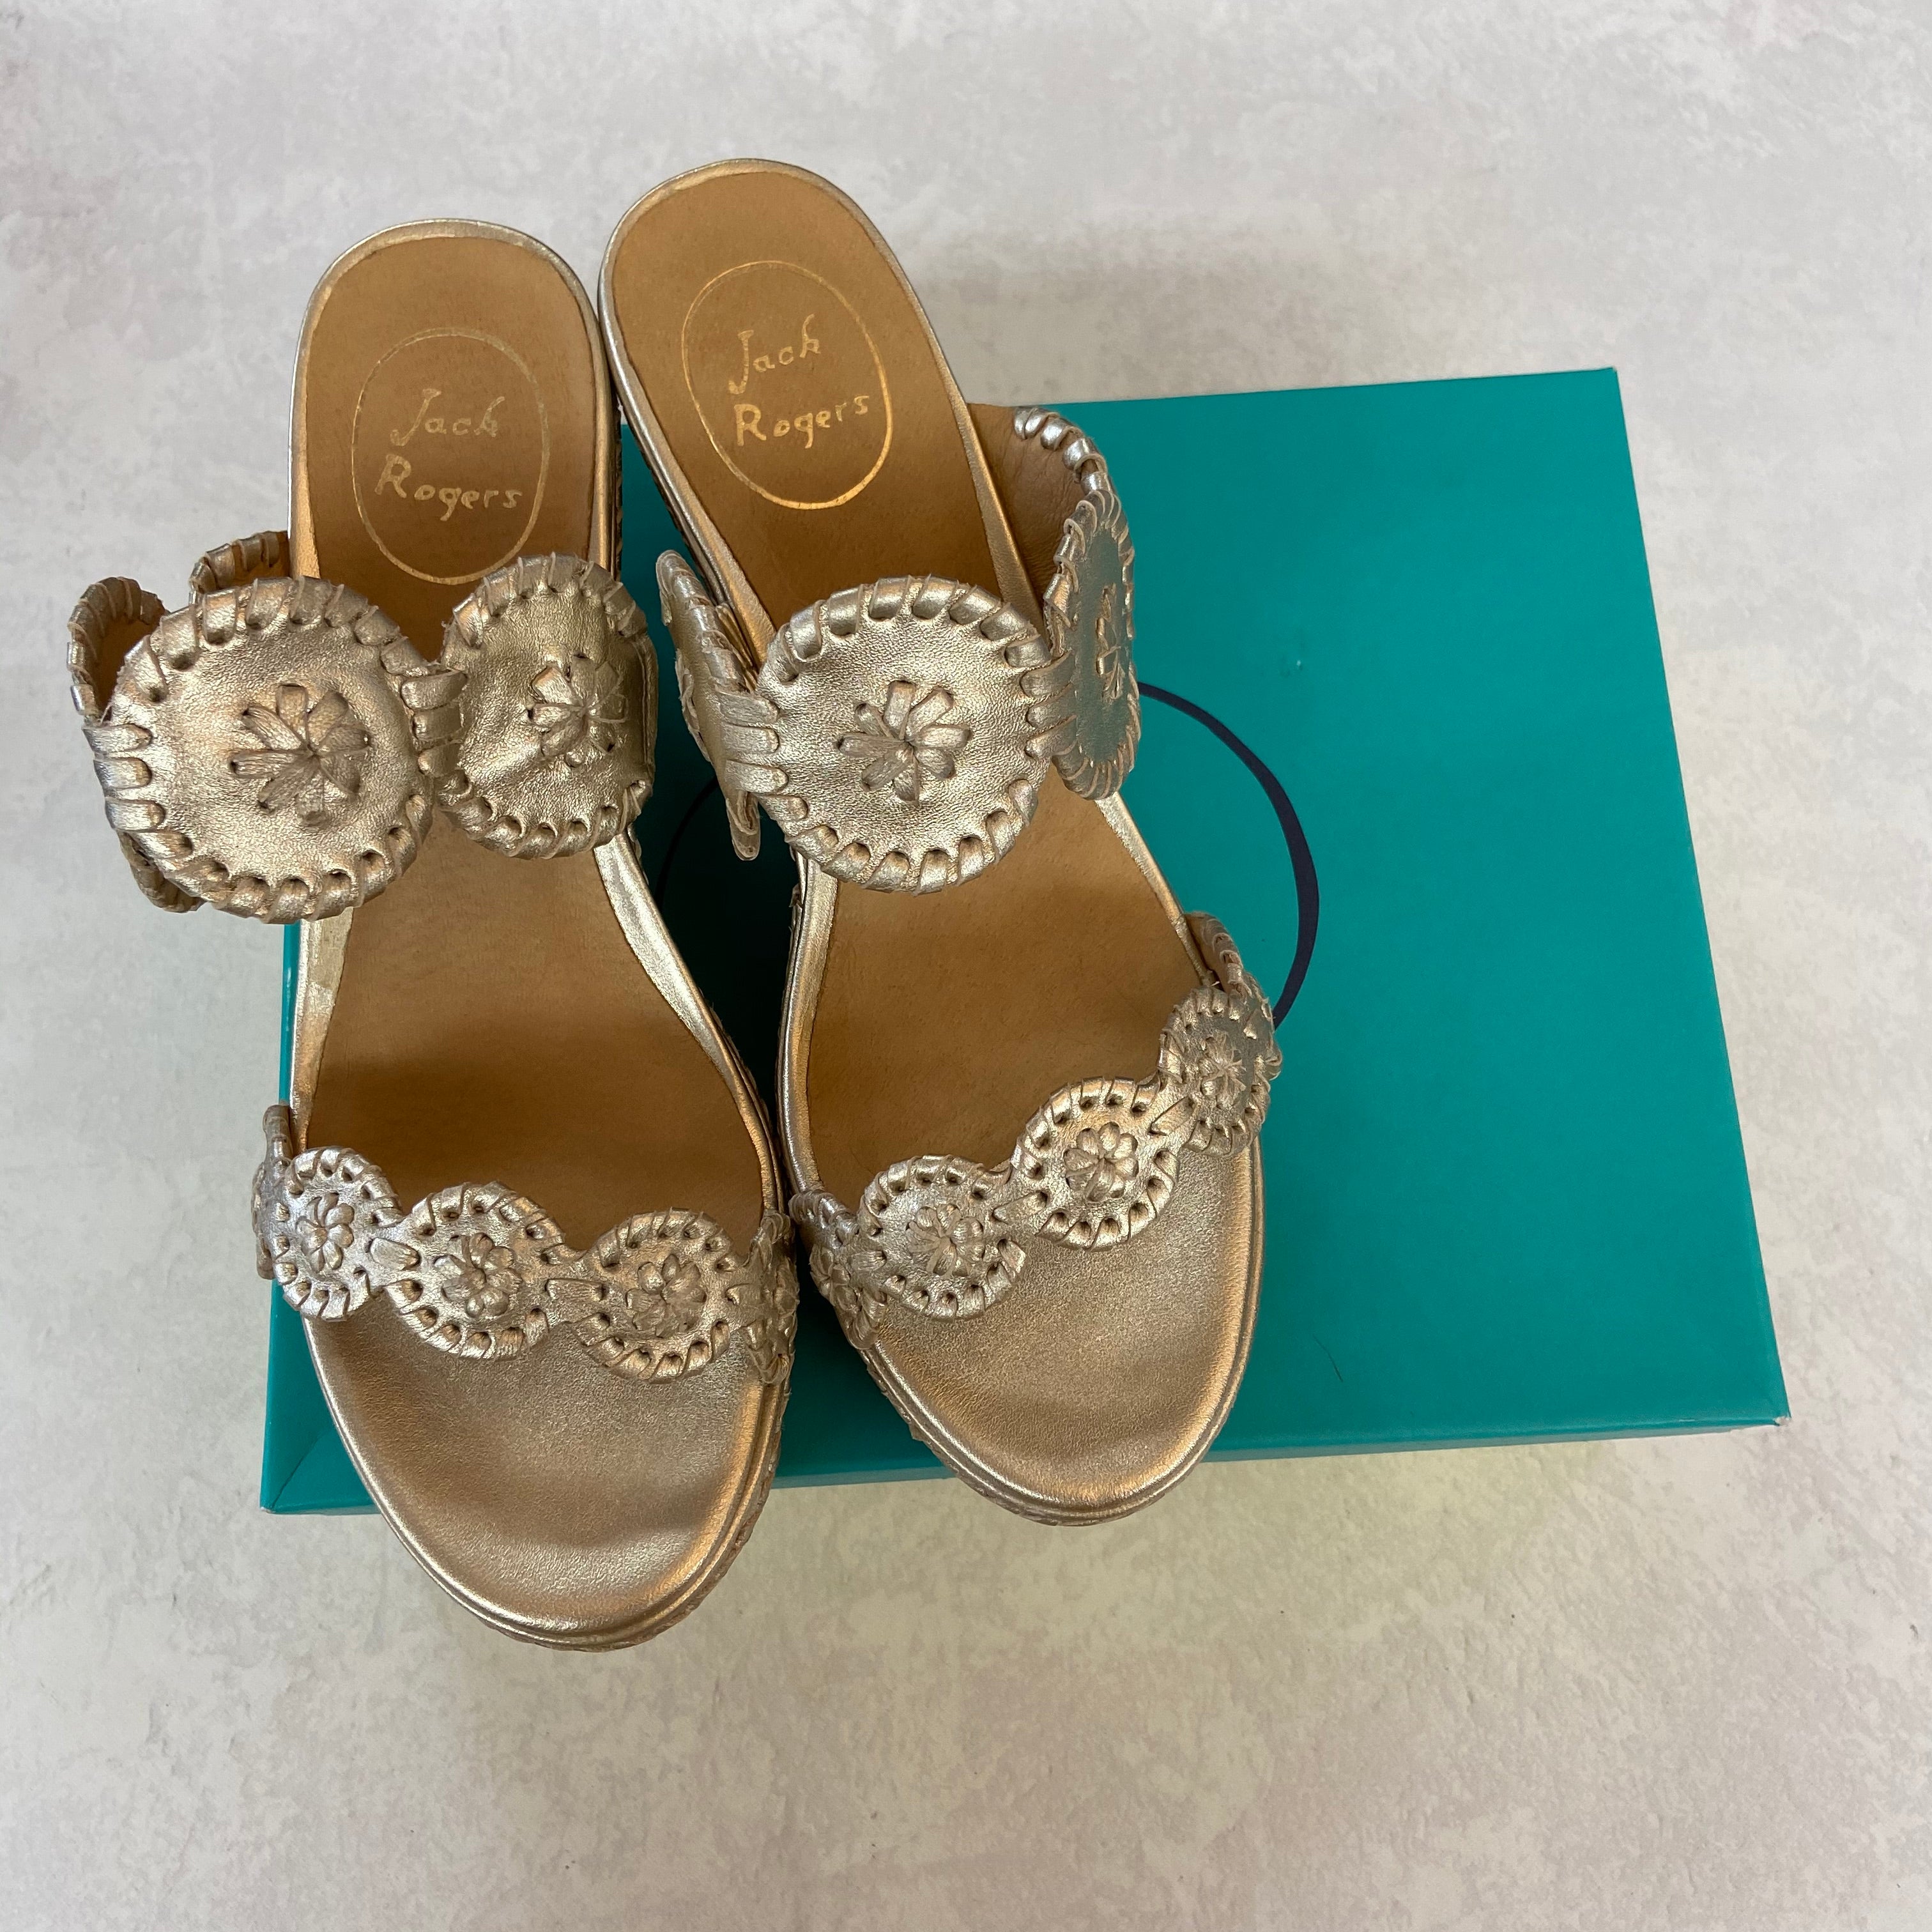 Sandals Low By Jack Rogers Size: 9 